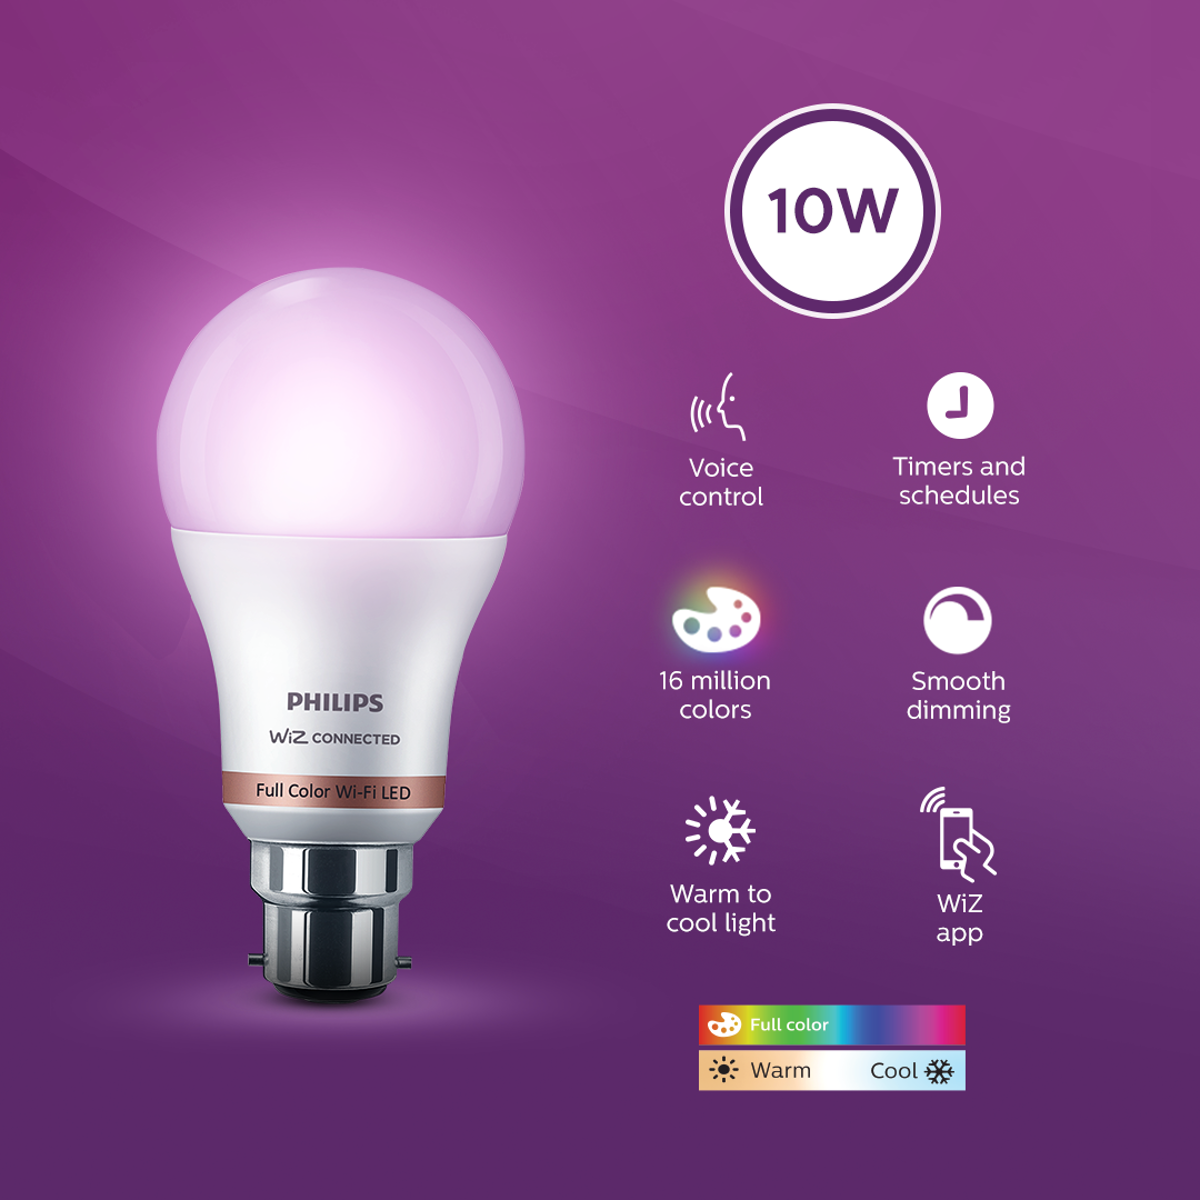 Philips Smart WiFi LED Bulb (Wiz Connected)